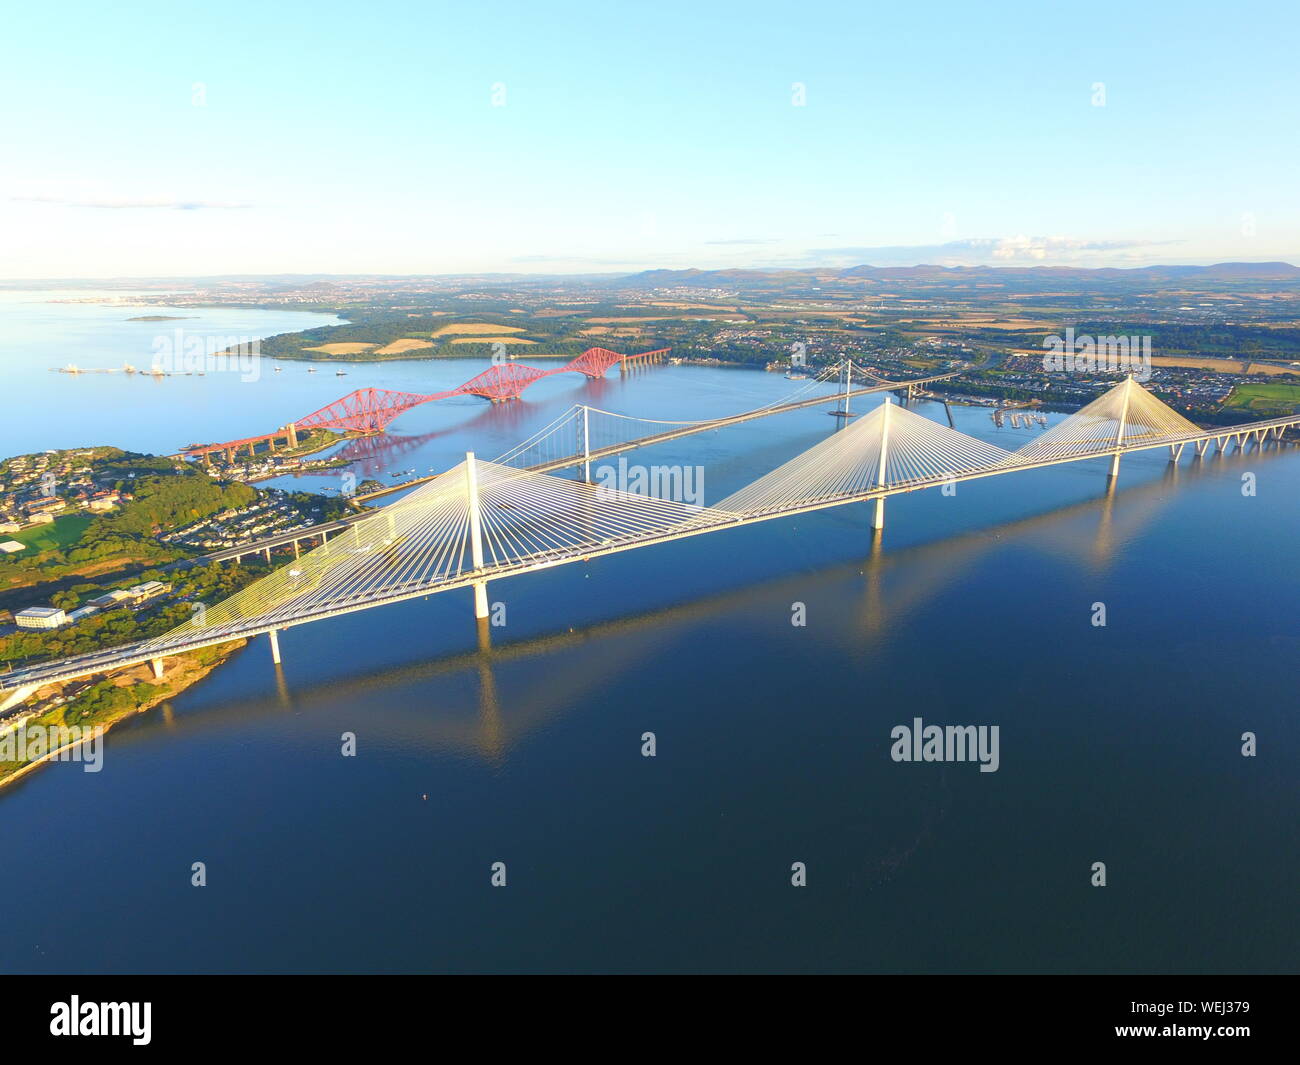 High Angle View Of Suspension Bridges Over Sea In City Stock Photo